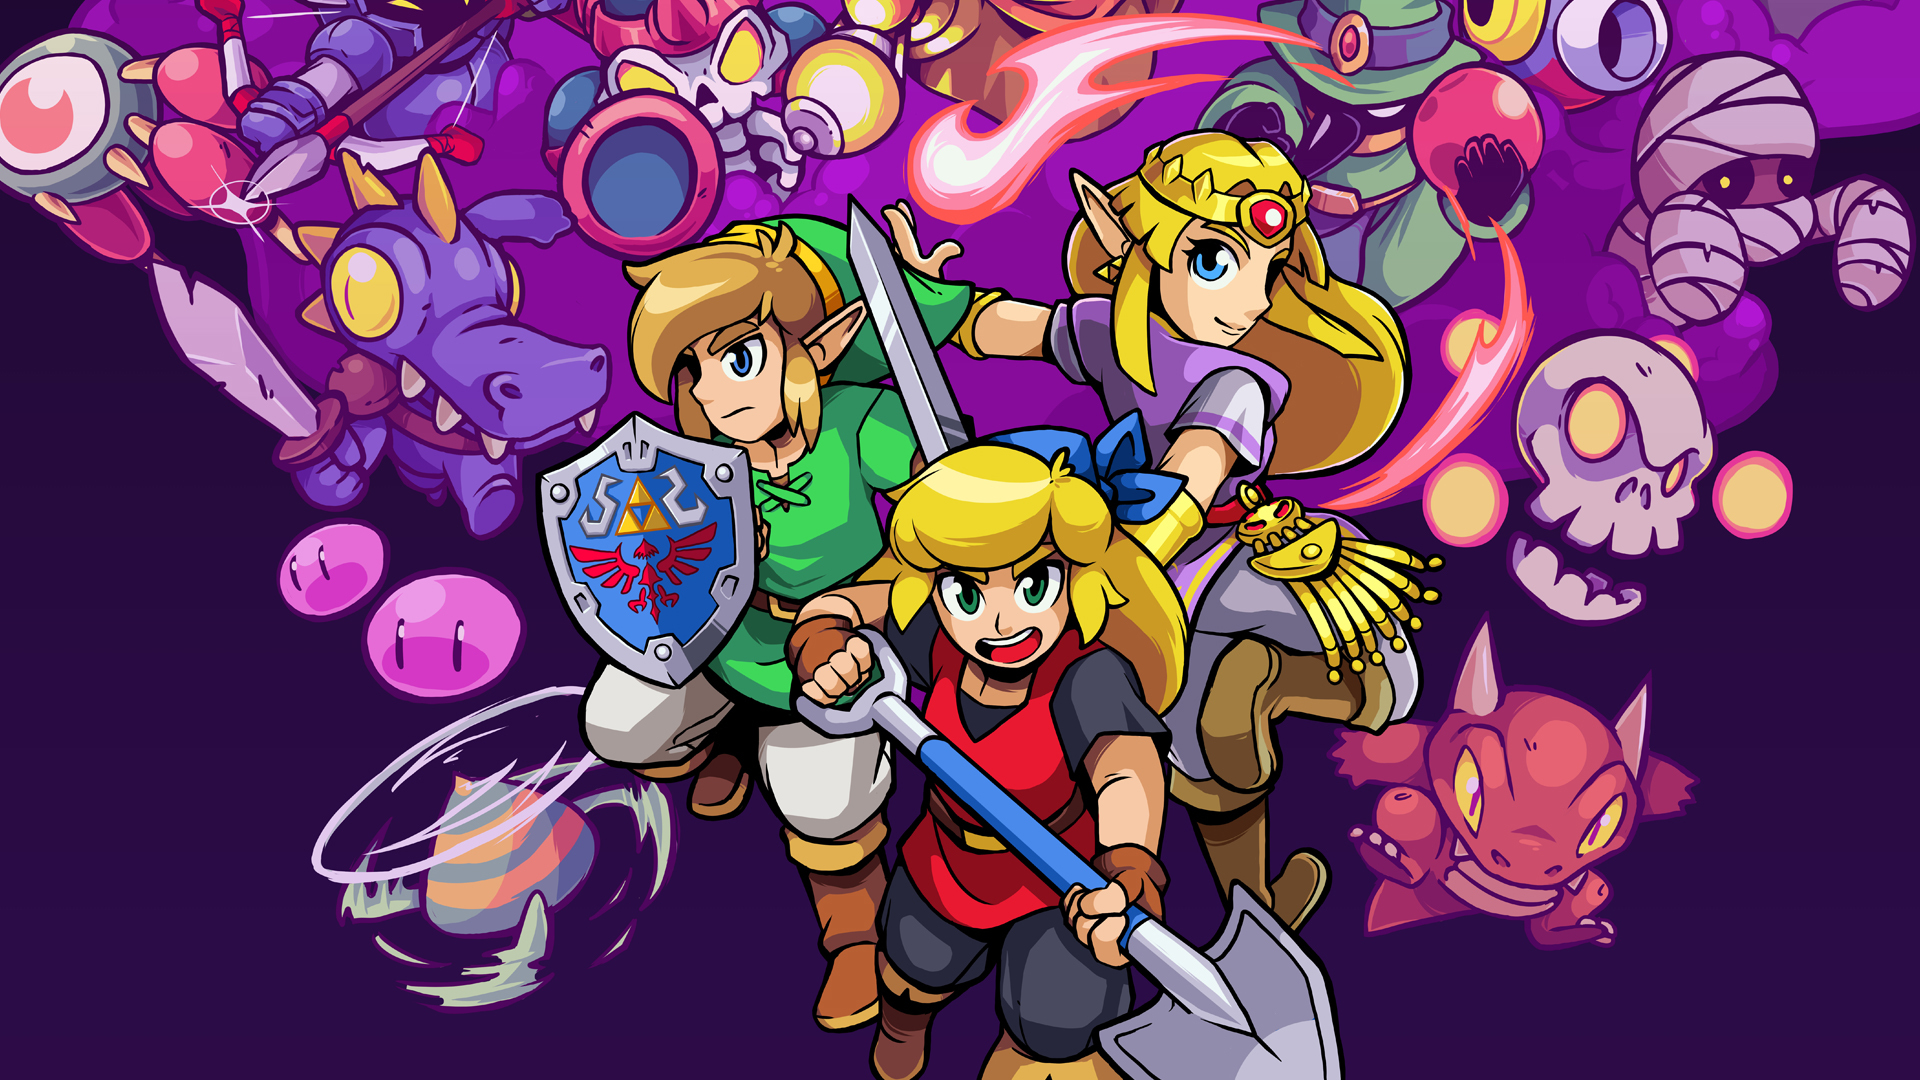 download cadence hyrule for free